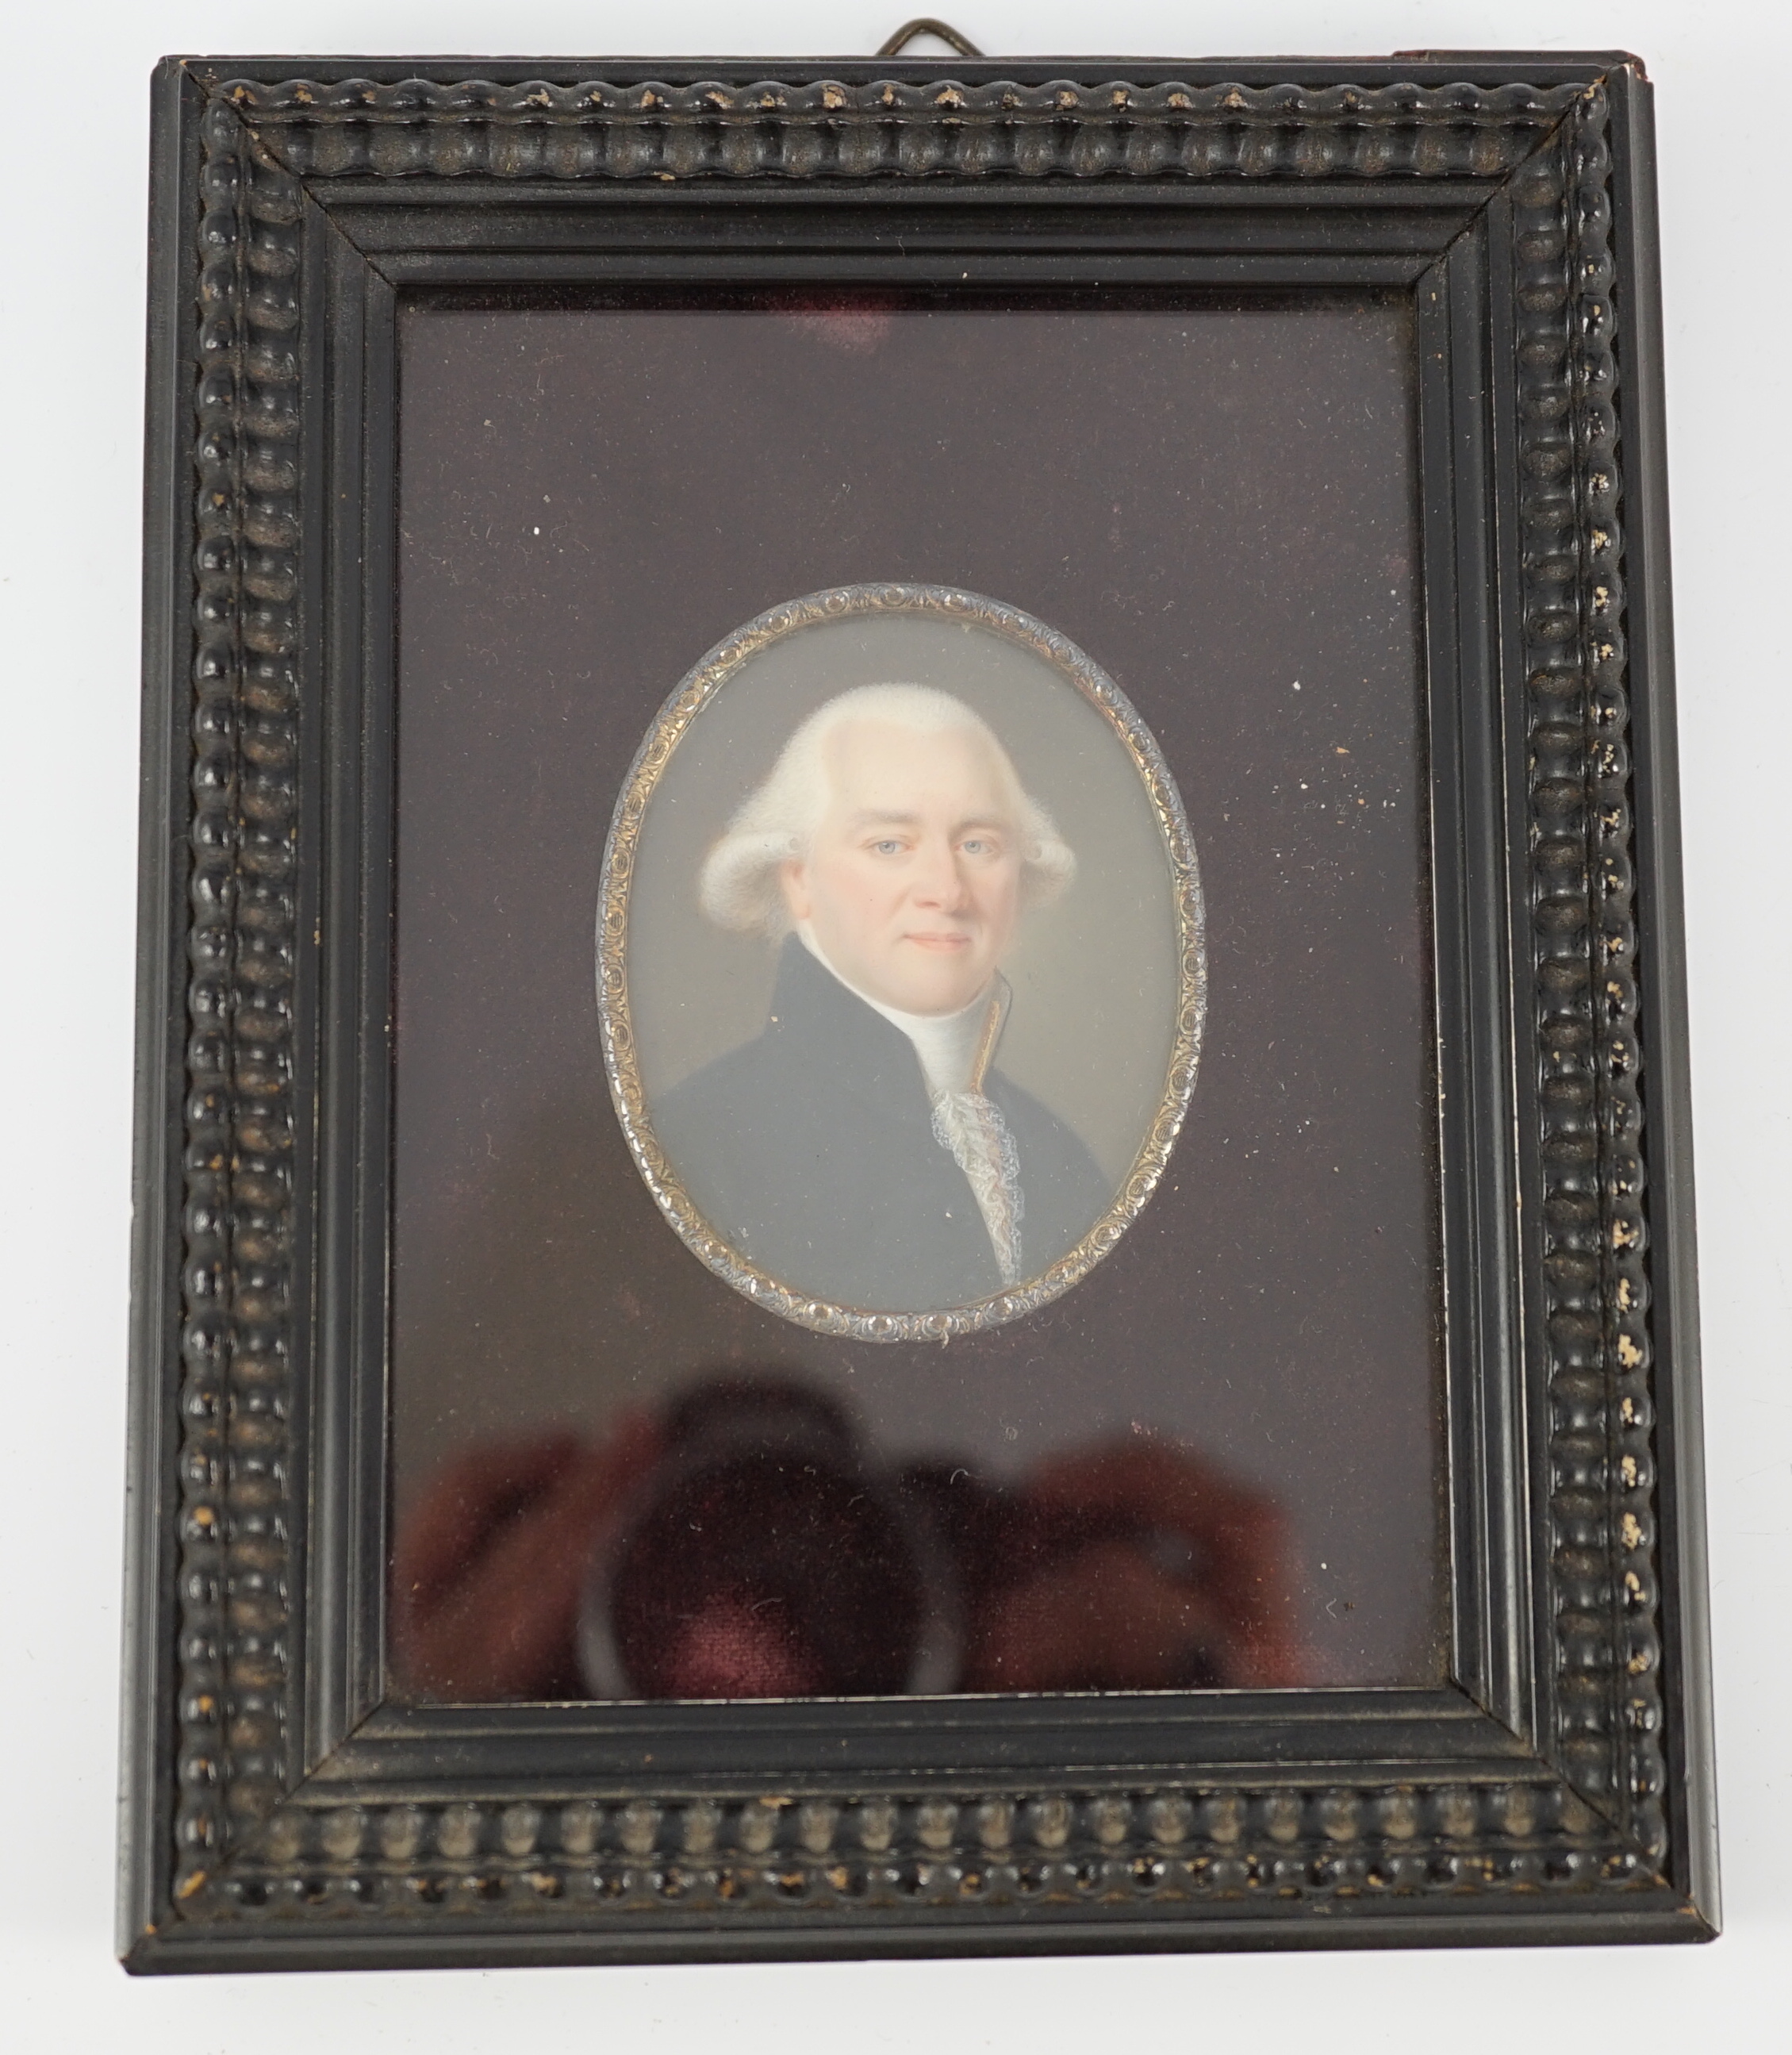 Late 18th Century Italian School, Portrait miniature of a gentleman, watercolour on ivory, 6.3 x 4.7cm. CITES Submission reference TPLMG8NW